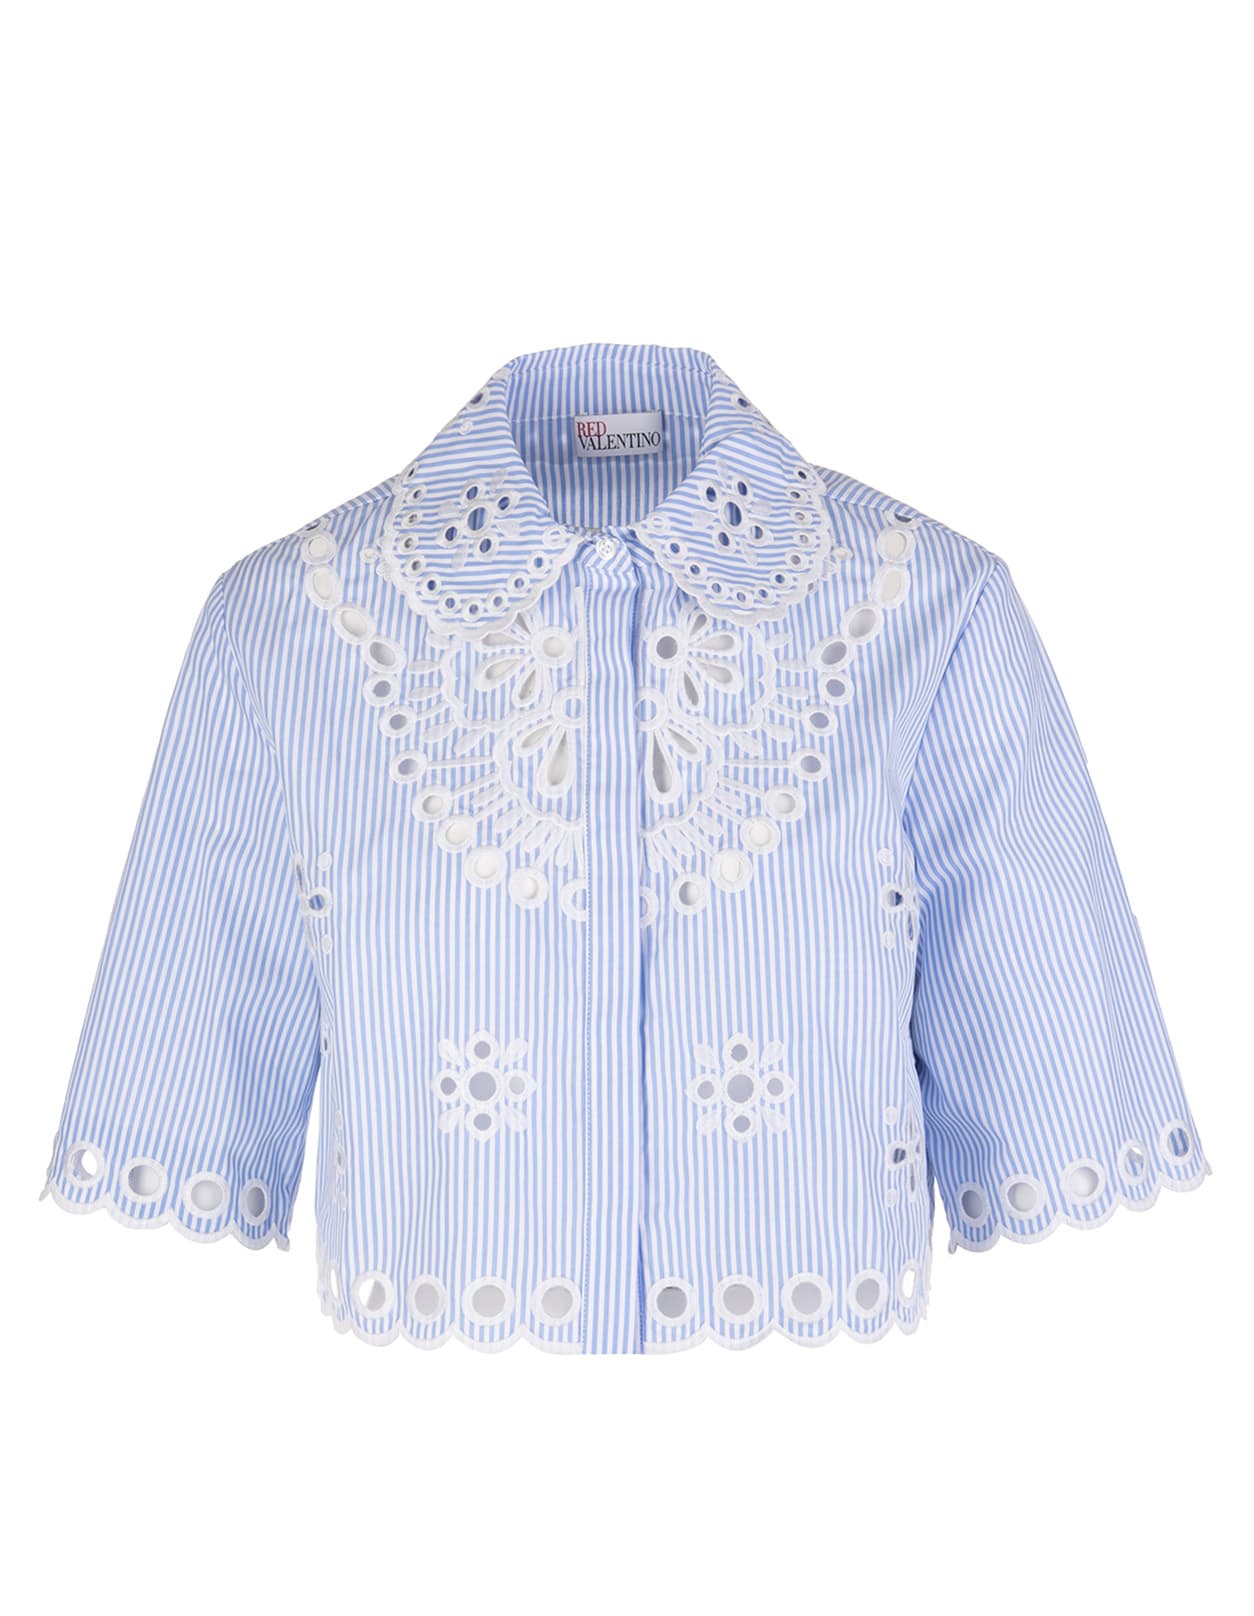 RED Valentino White And Light Blue Striped Crop Shirt With Sangallo Embroidery